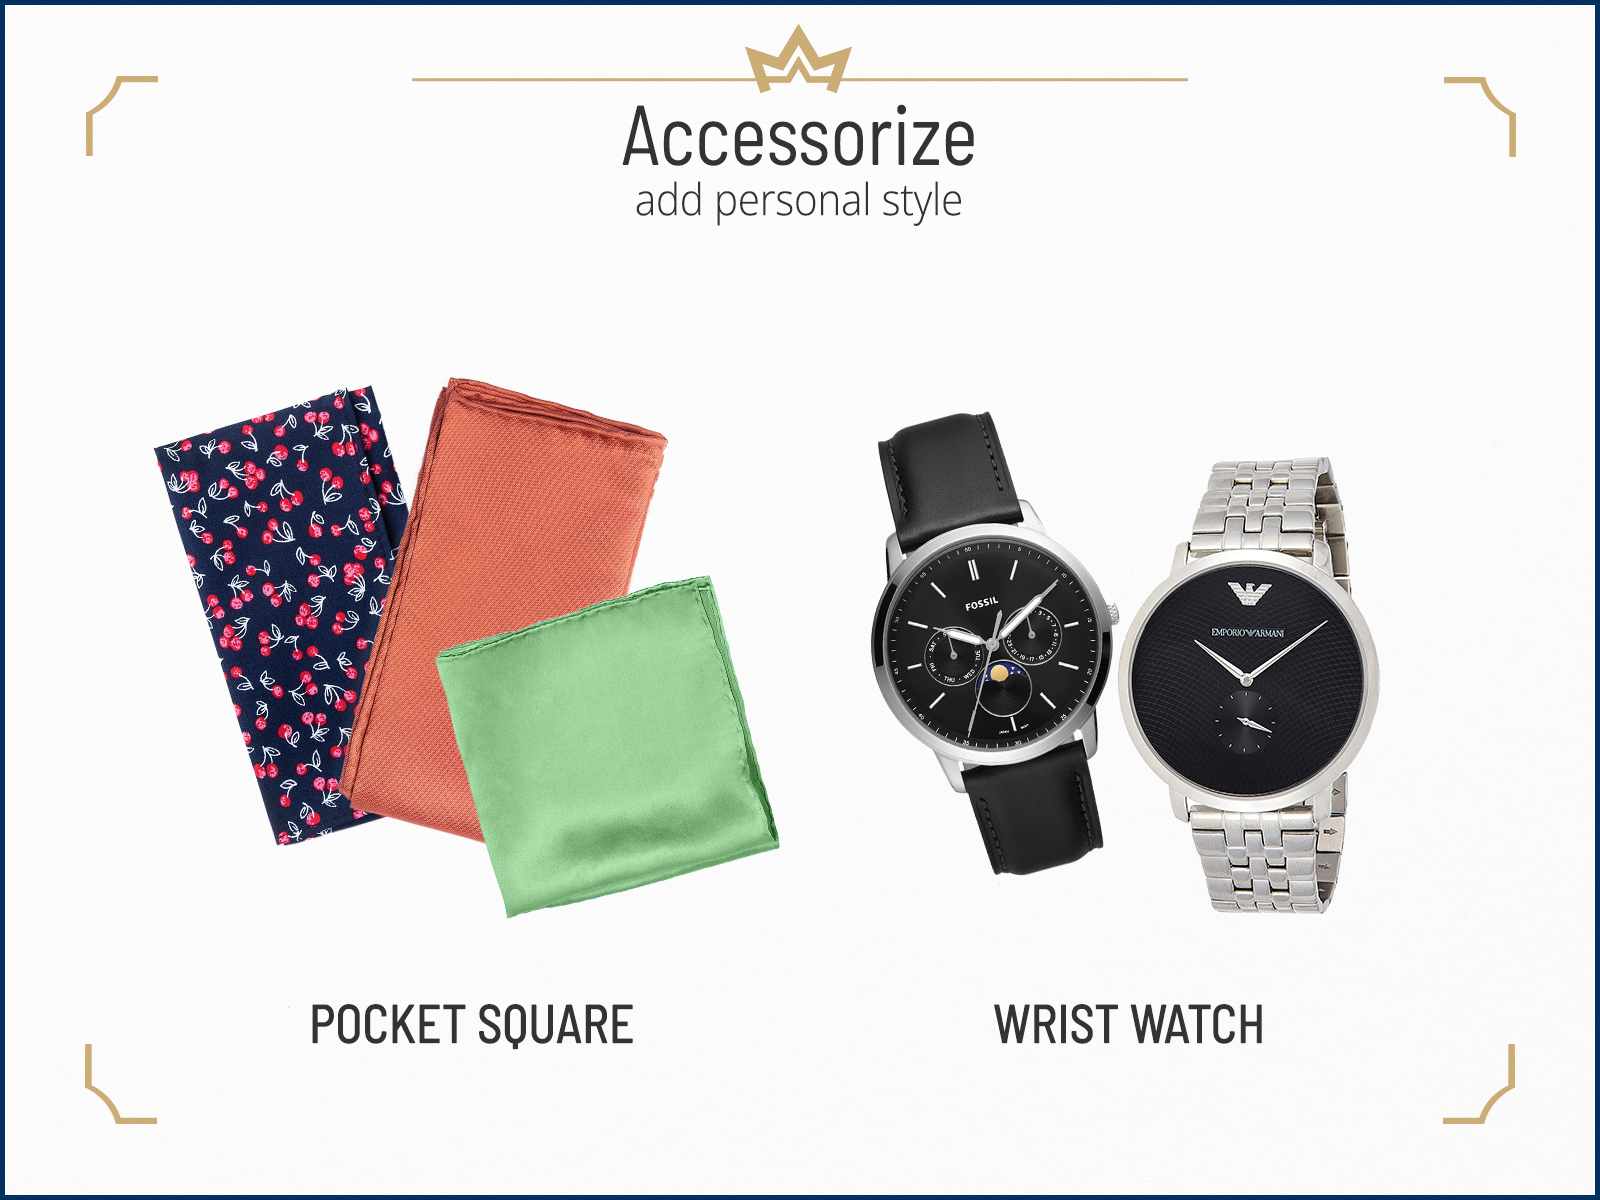 Recommended accessories for semi-formal events